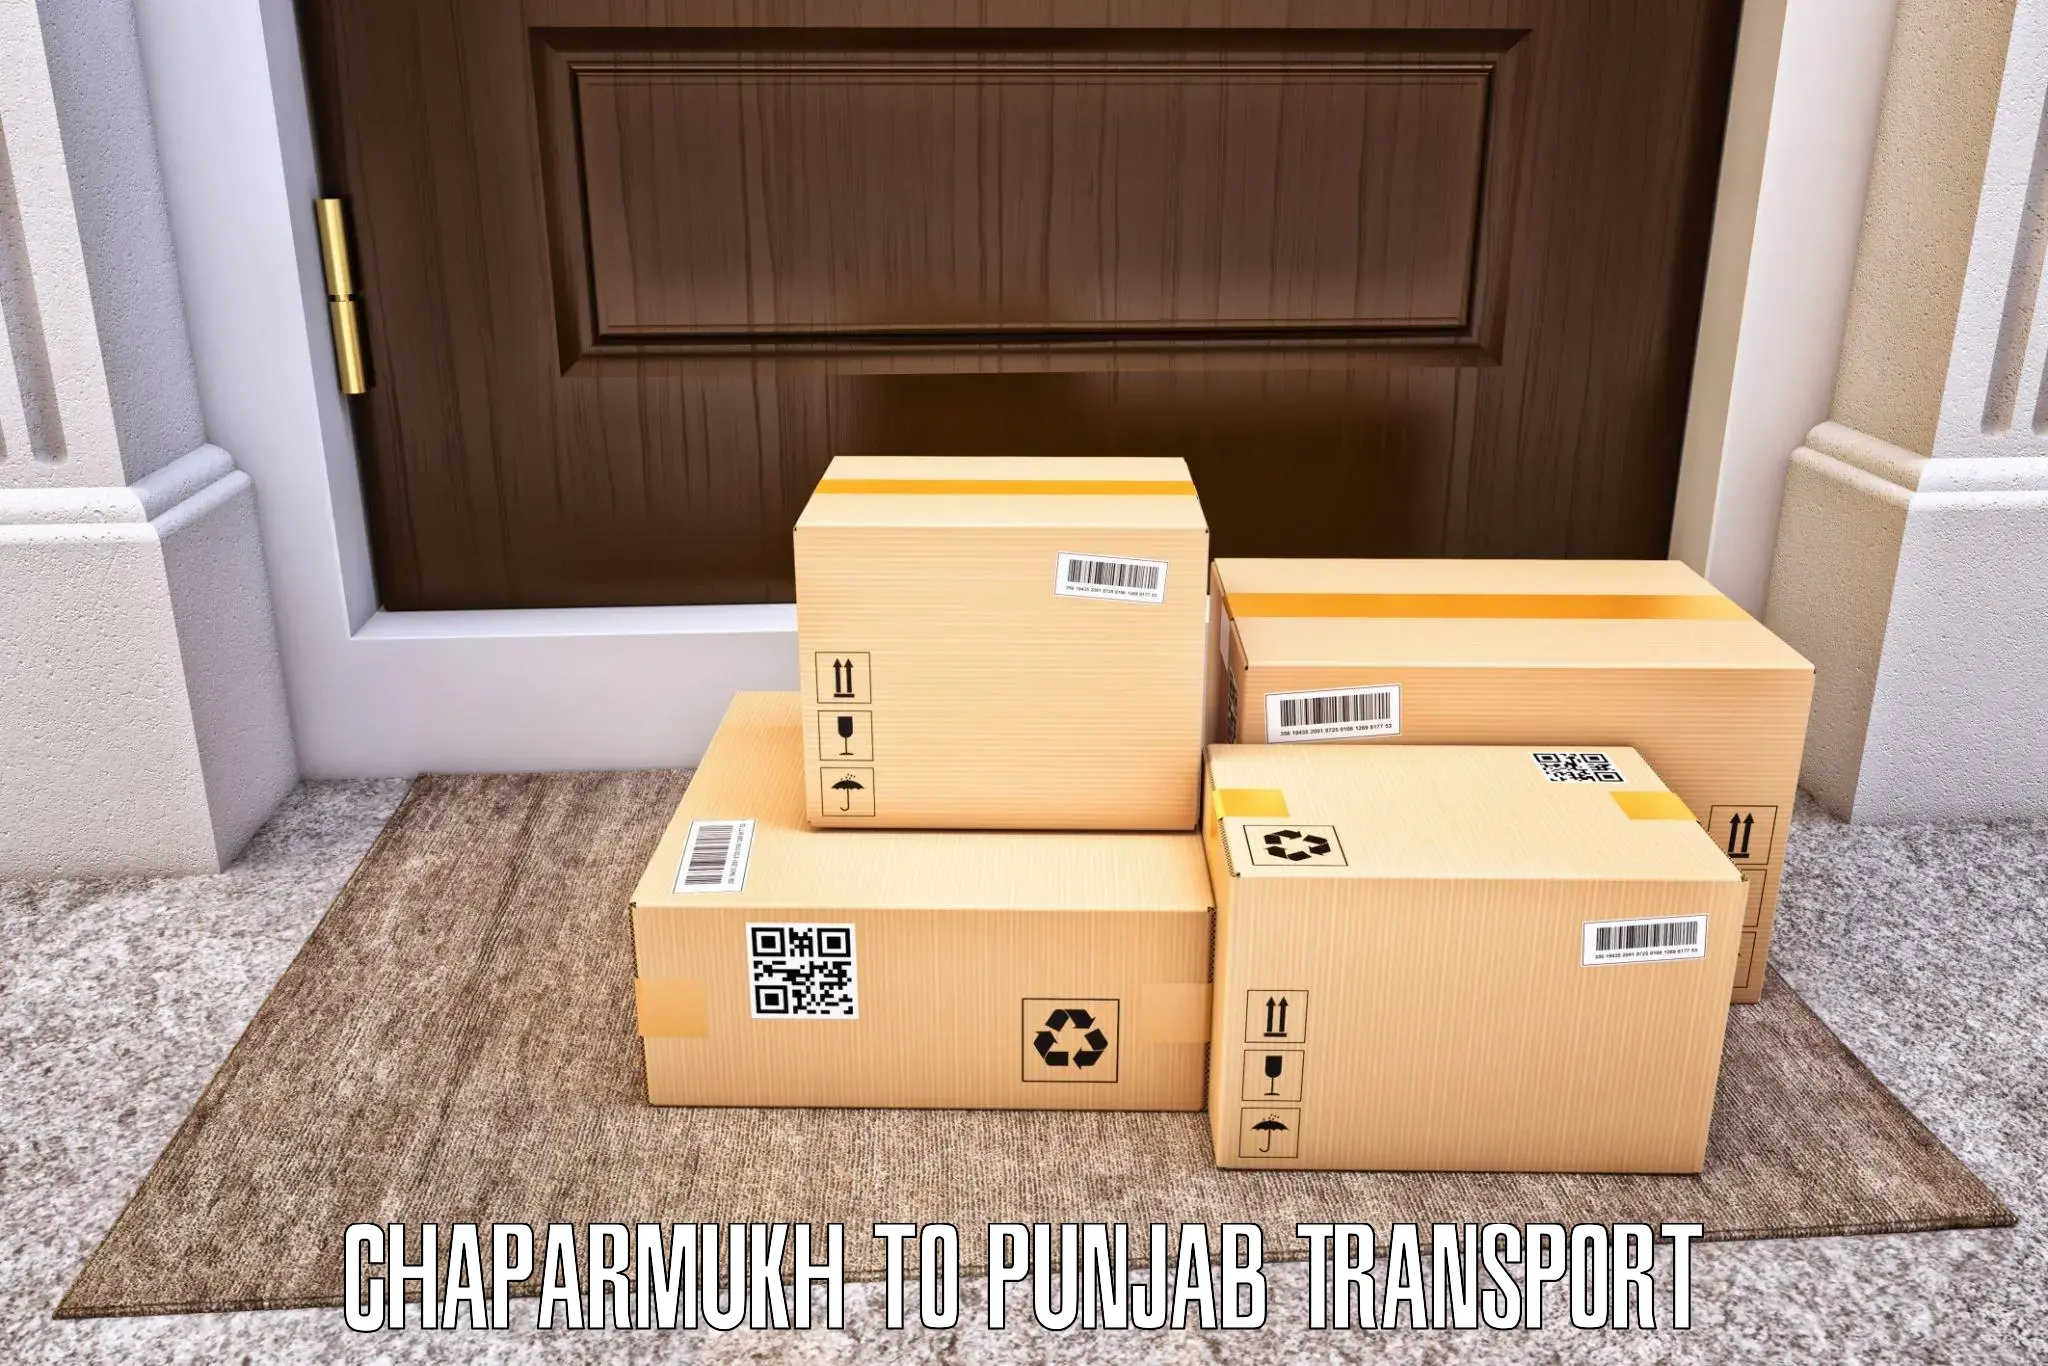 Air cargo transport services in Chaparmukh to Mehta Chowk